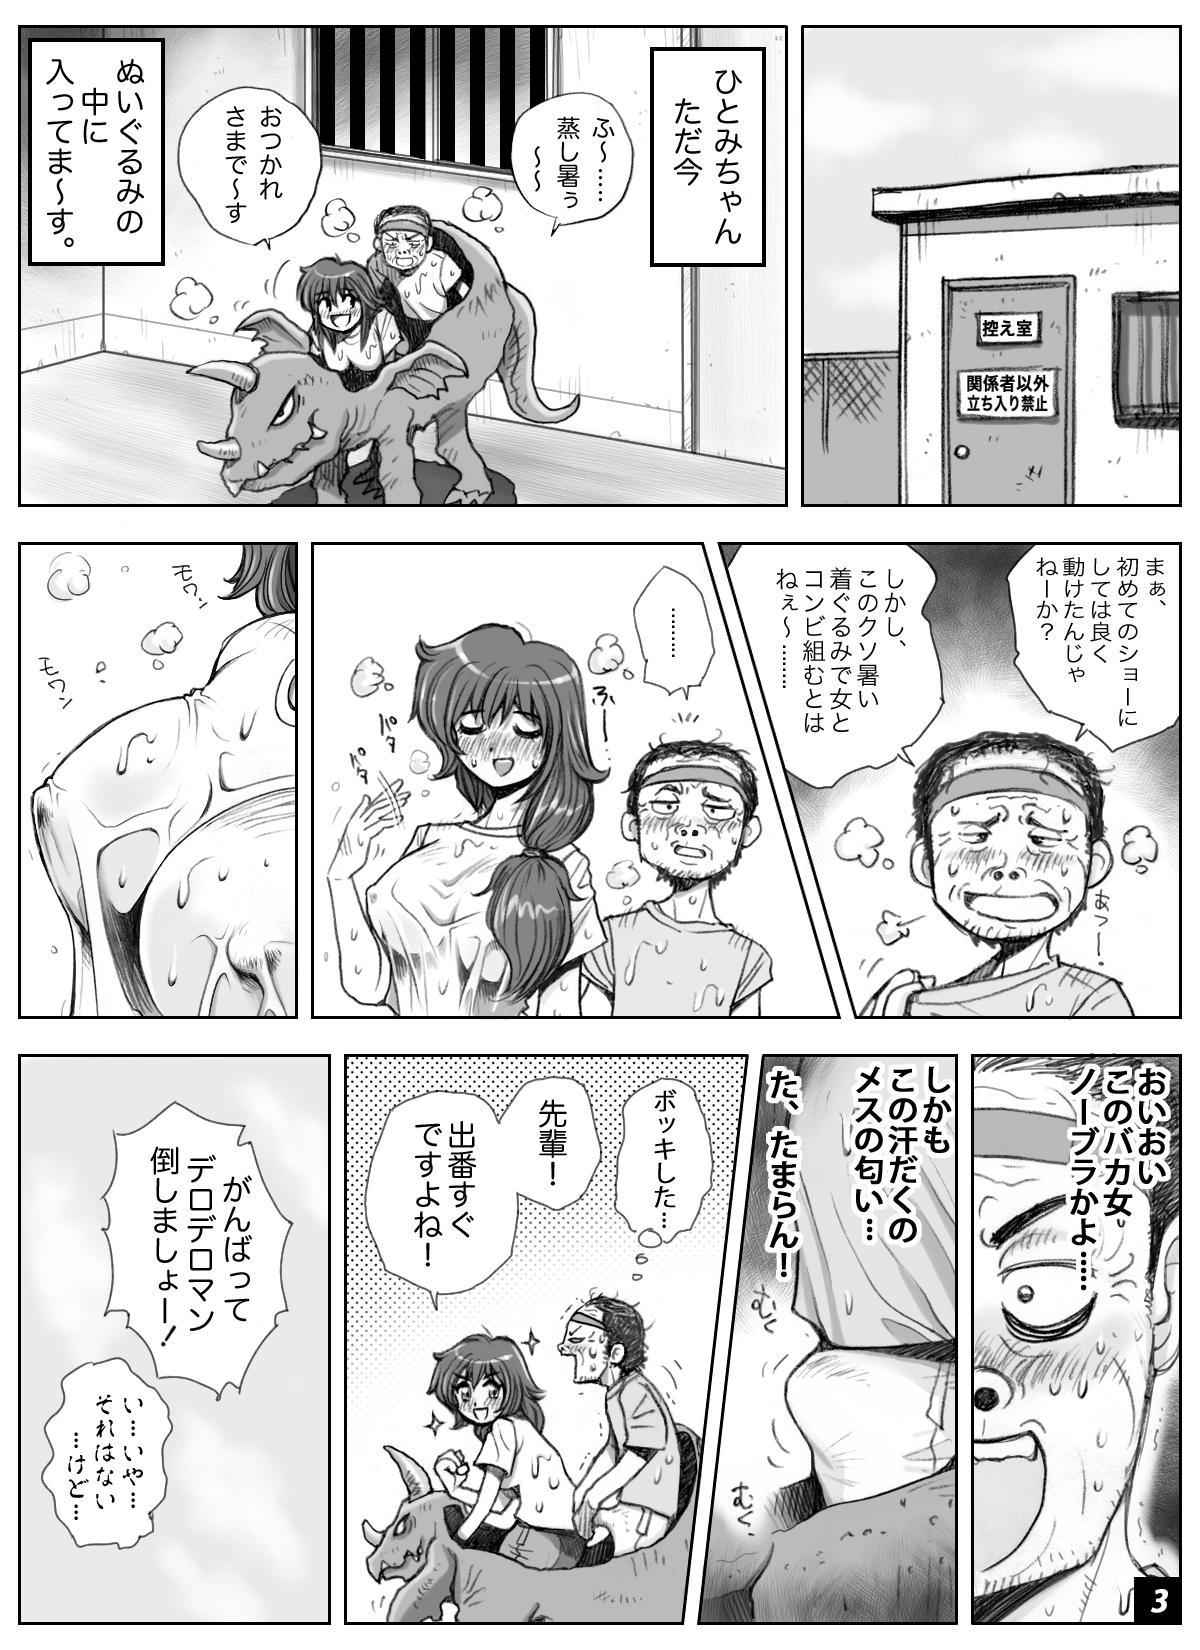 Groupsex ikeikeフリーター ひとみちゃん Vol.6 Scissoring - Page 3